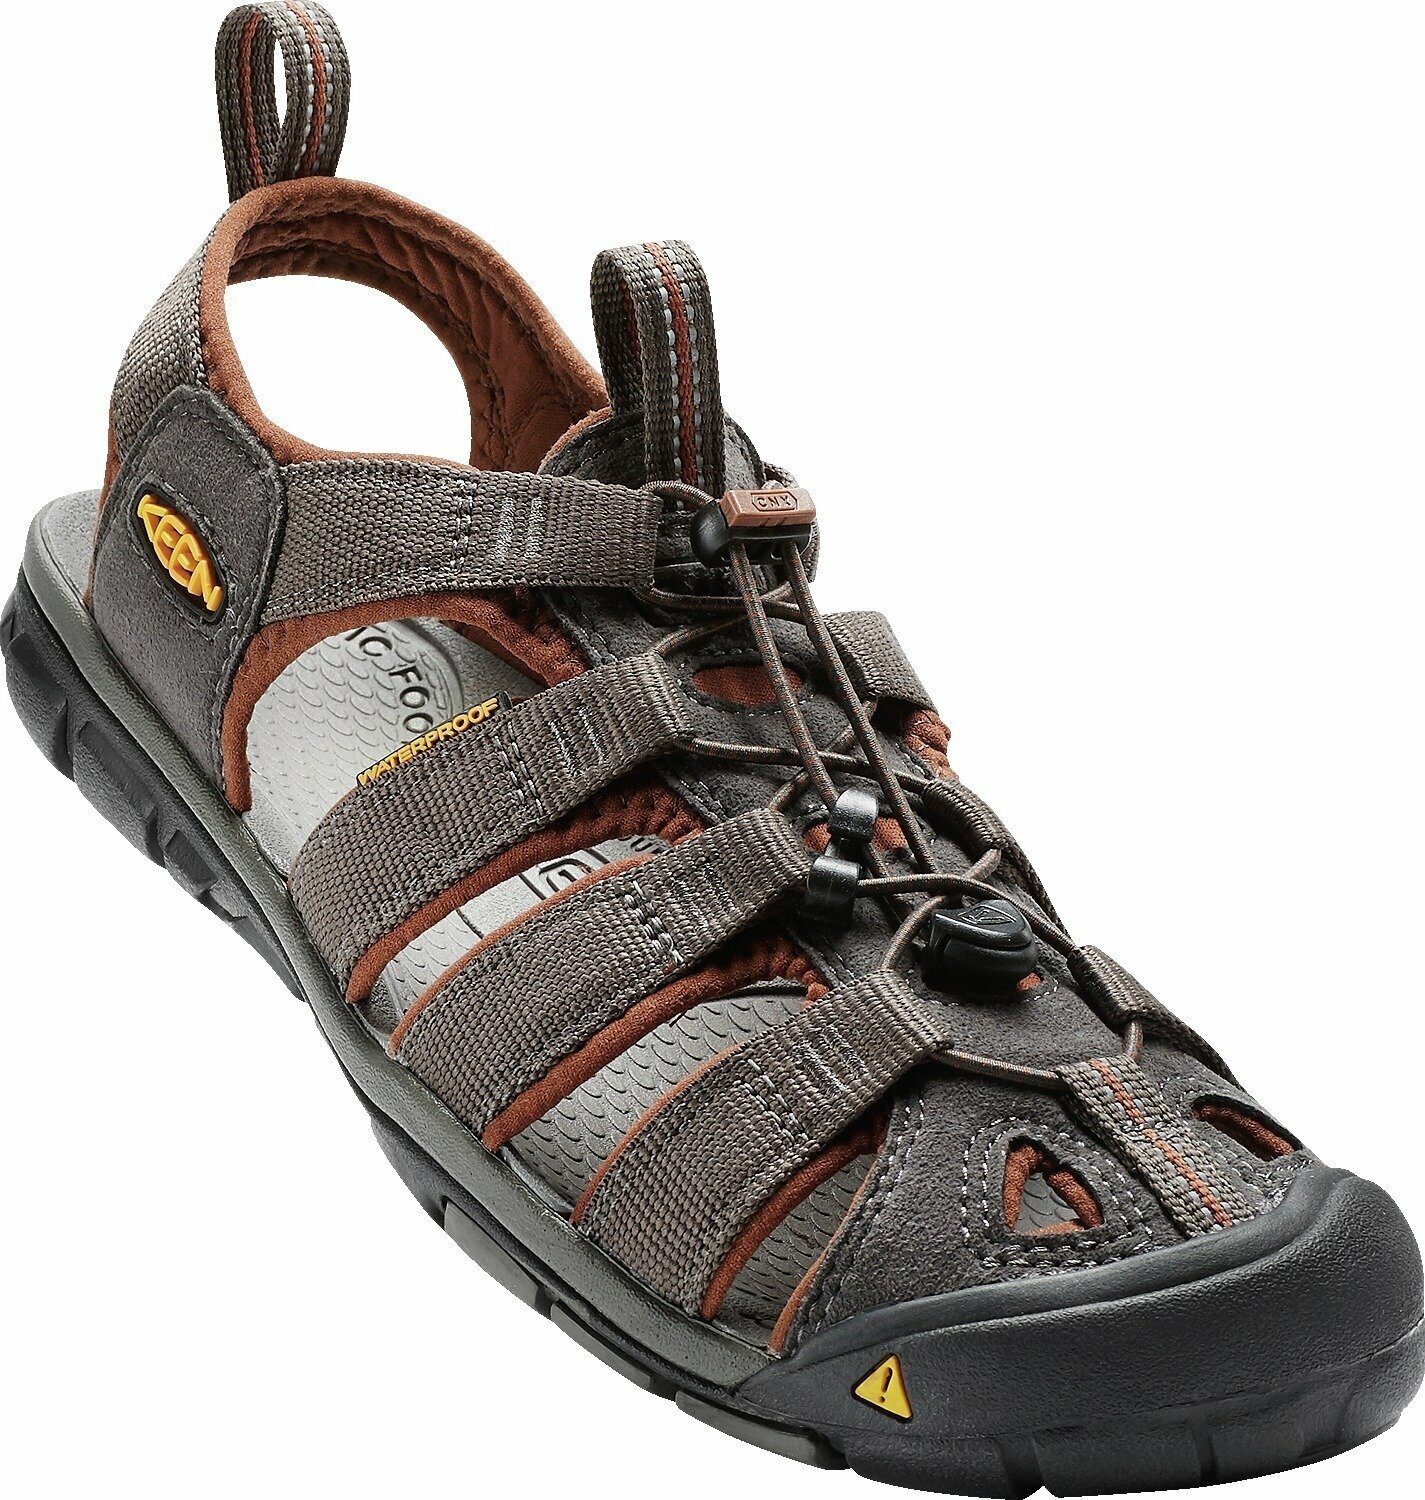 Chaussures outdoor hommes Keen Men's Clearwater CNX Sandal Raven/Tortoise Shell 43 Chaussures outdoor hommes